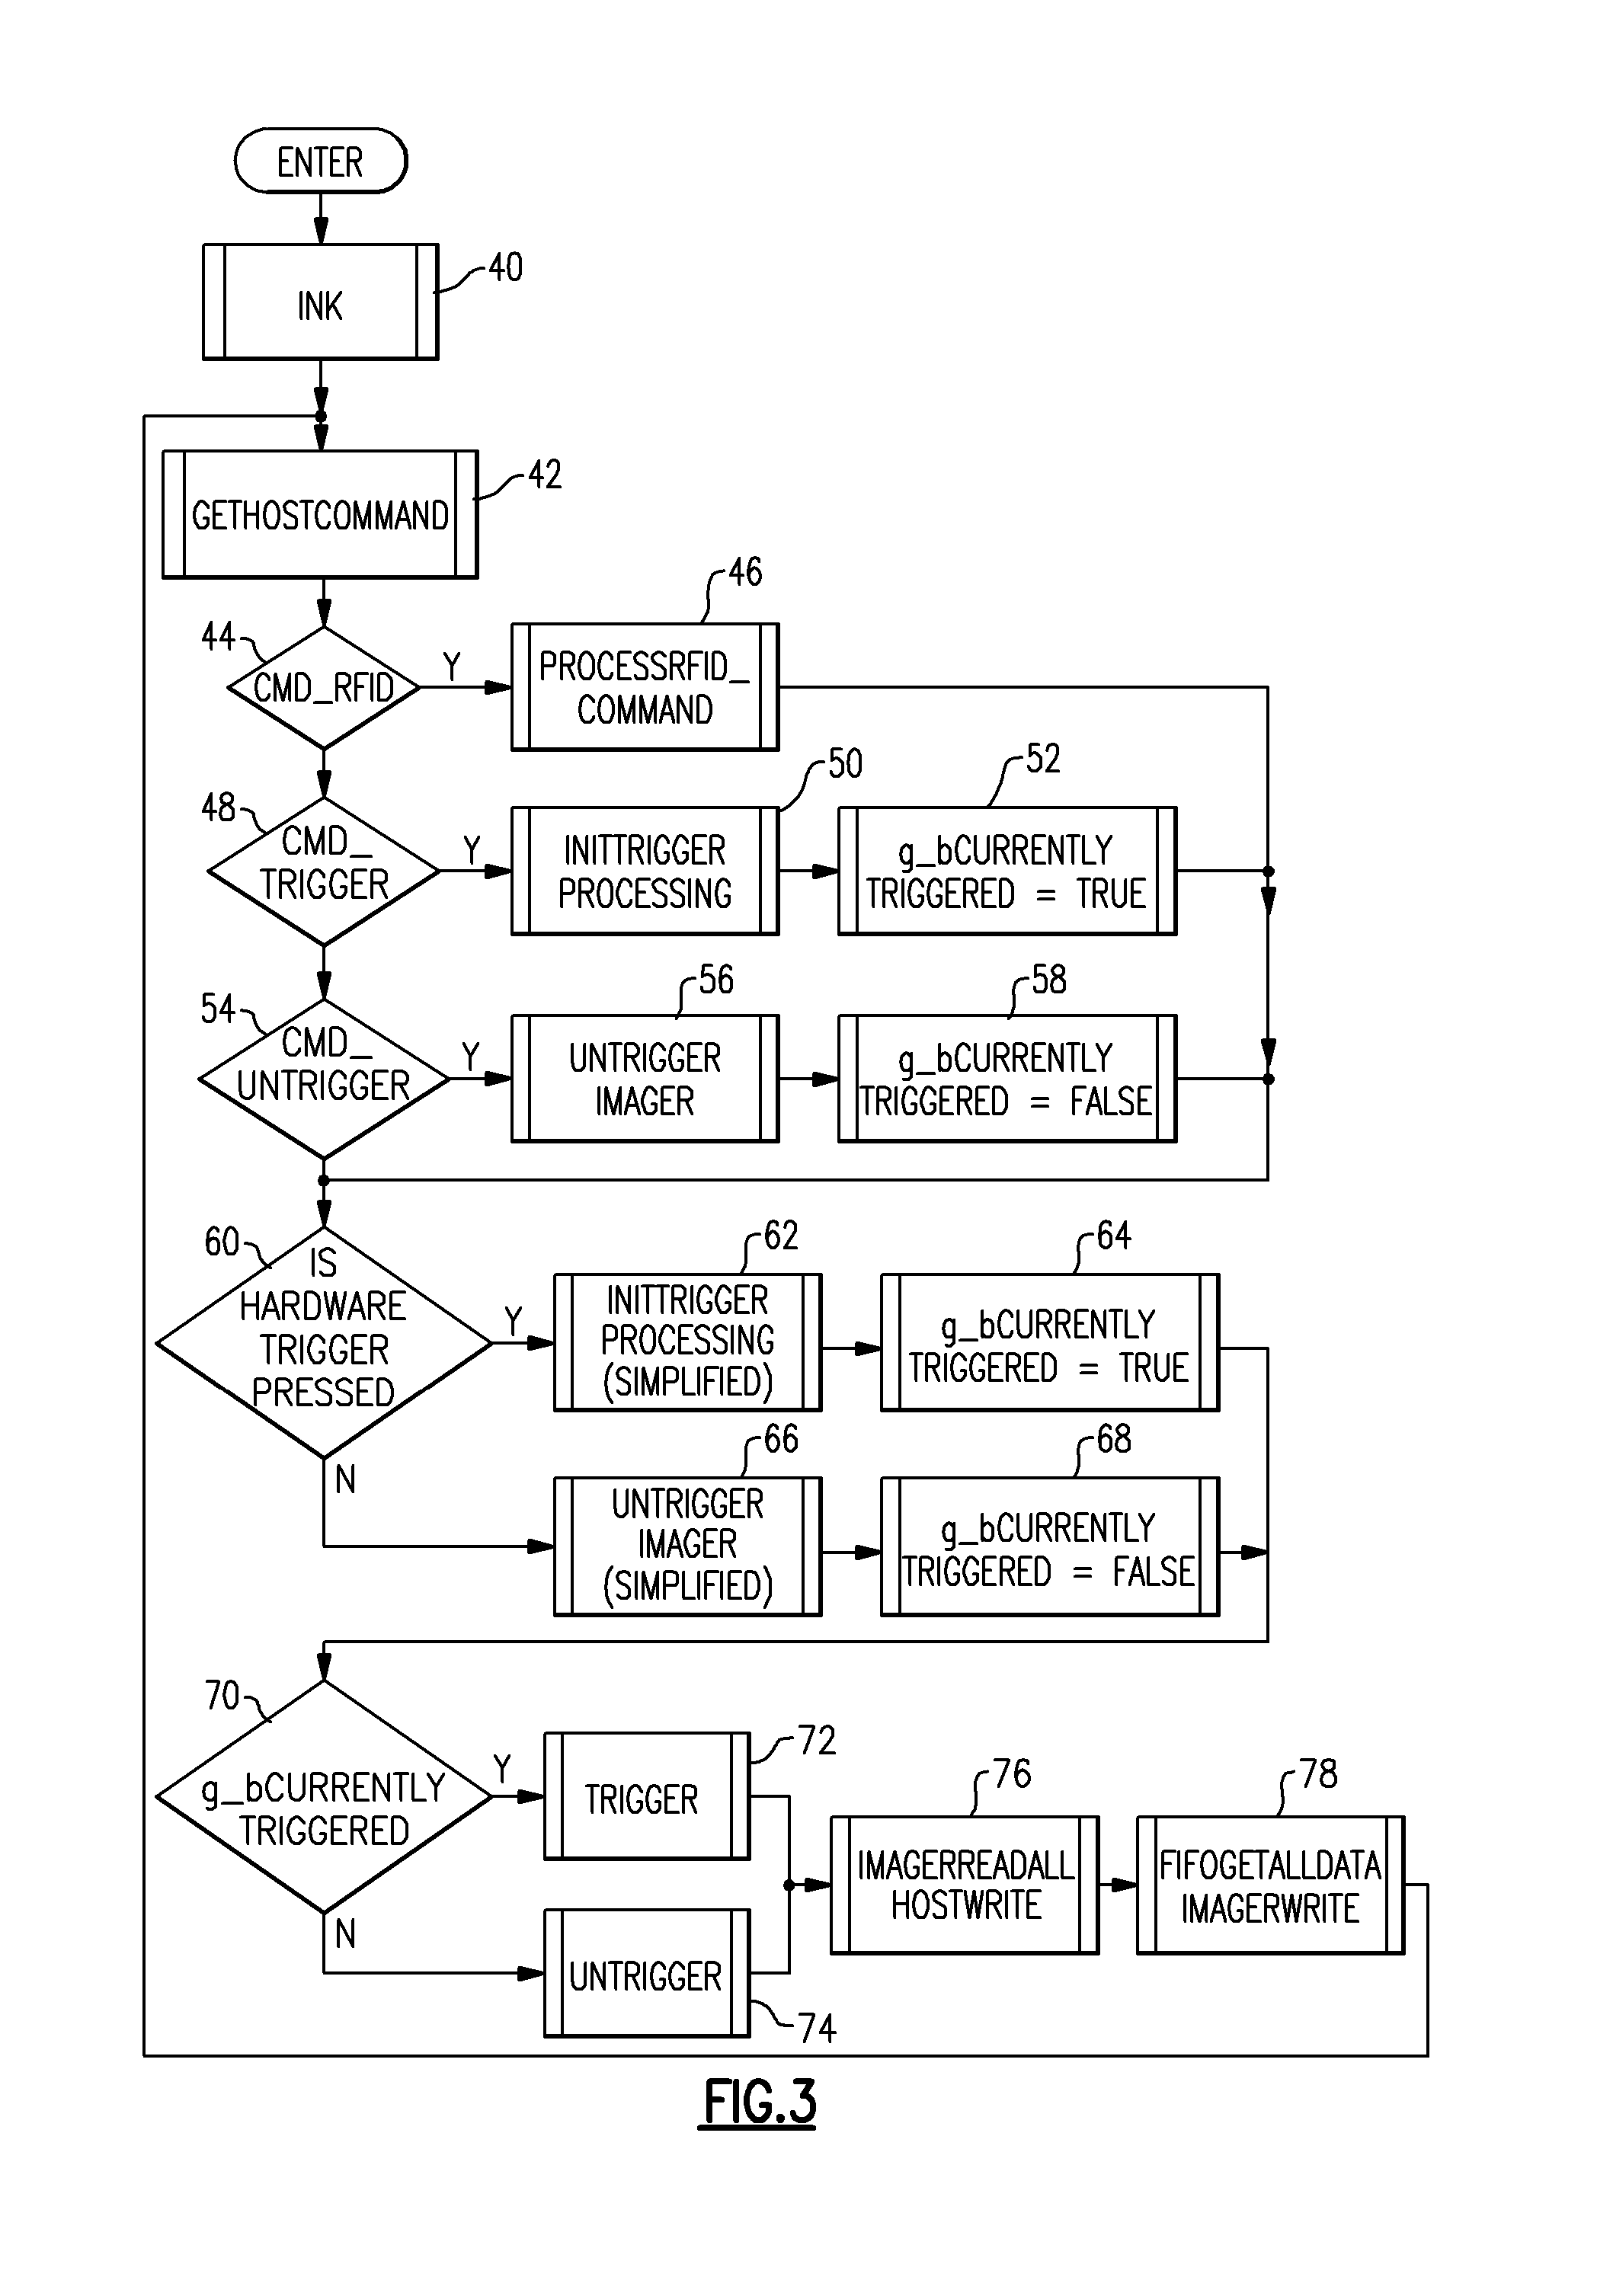 Infusion Pump Having Radiofrequency Identification and Optical Imaging Capabilities